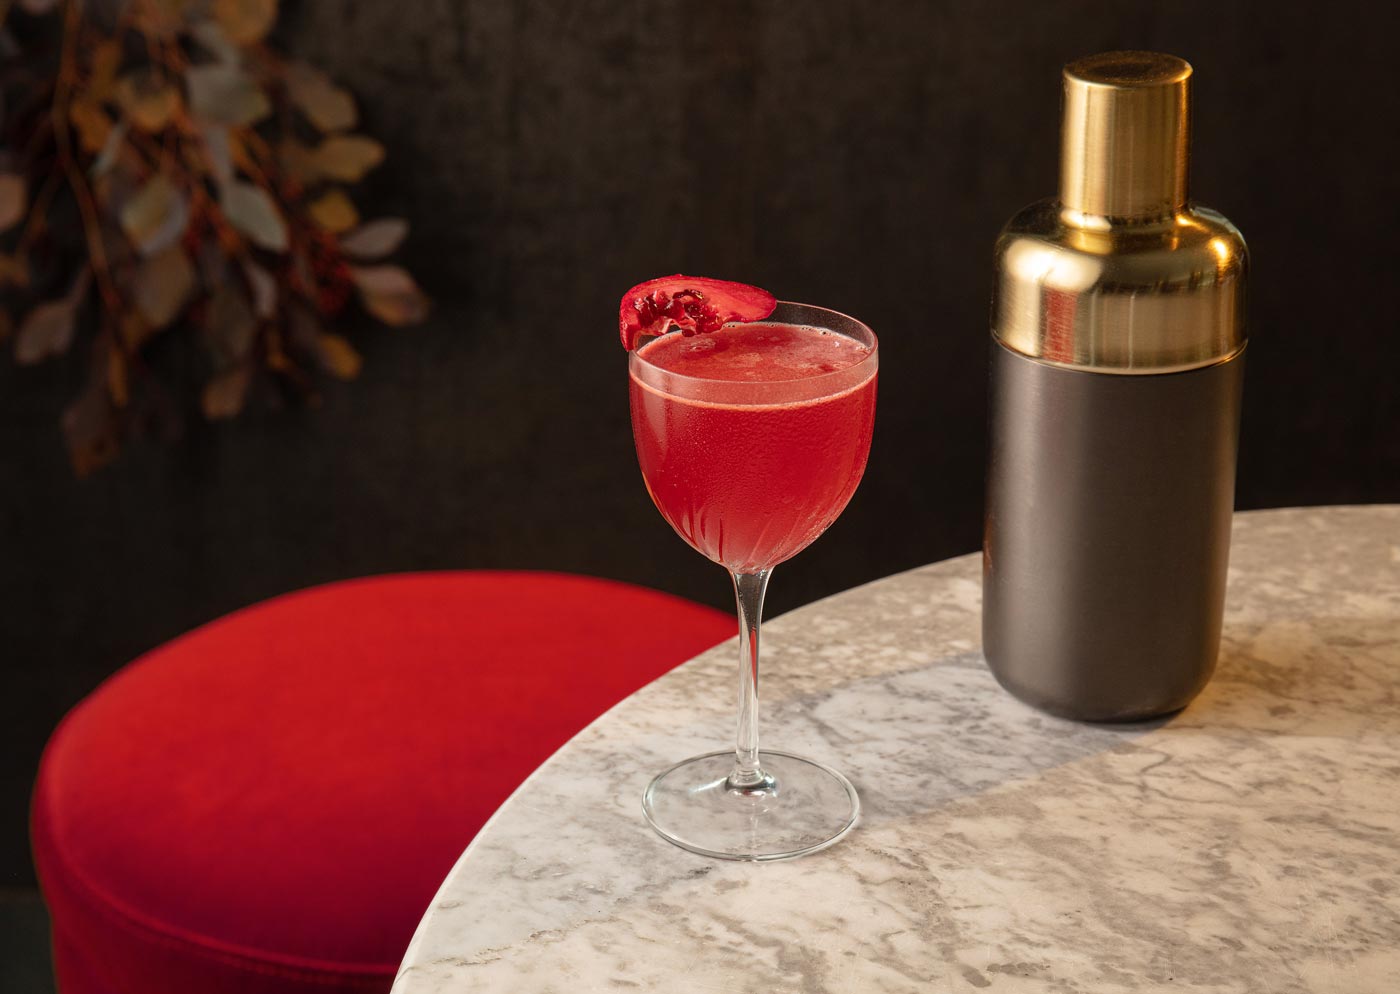 A short coupe glass sits on the edge of a marble table, placed next to a cocktail shaker. The glass contains  a red drink topped with a pomegranate slice. A red bar stool is placed until the table, and a plant can be seen in the background.